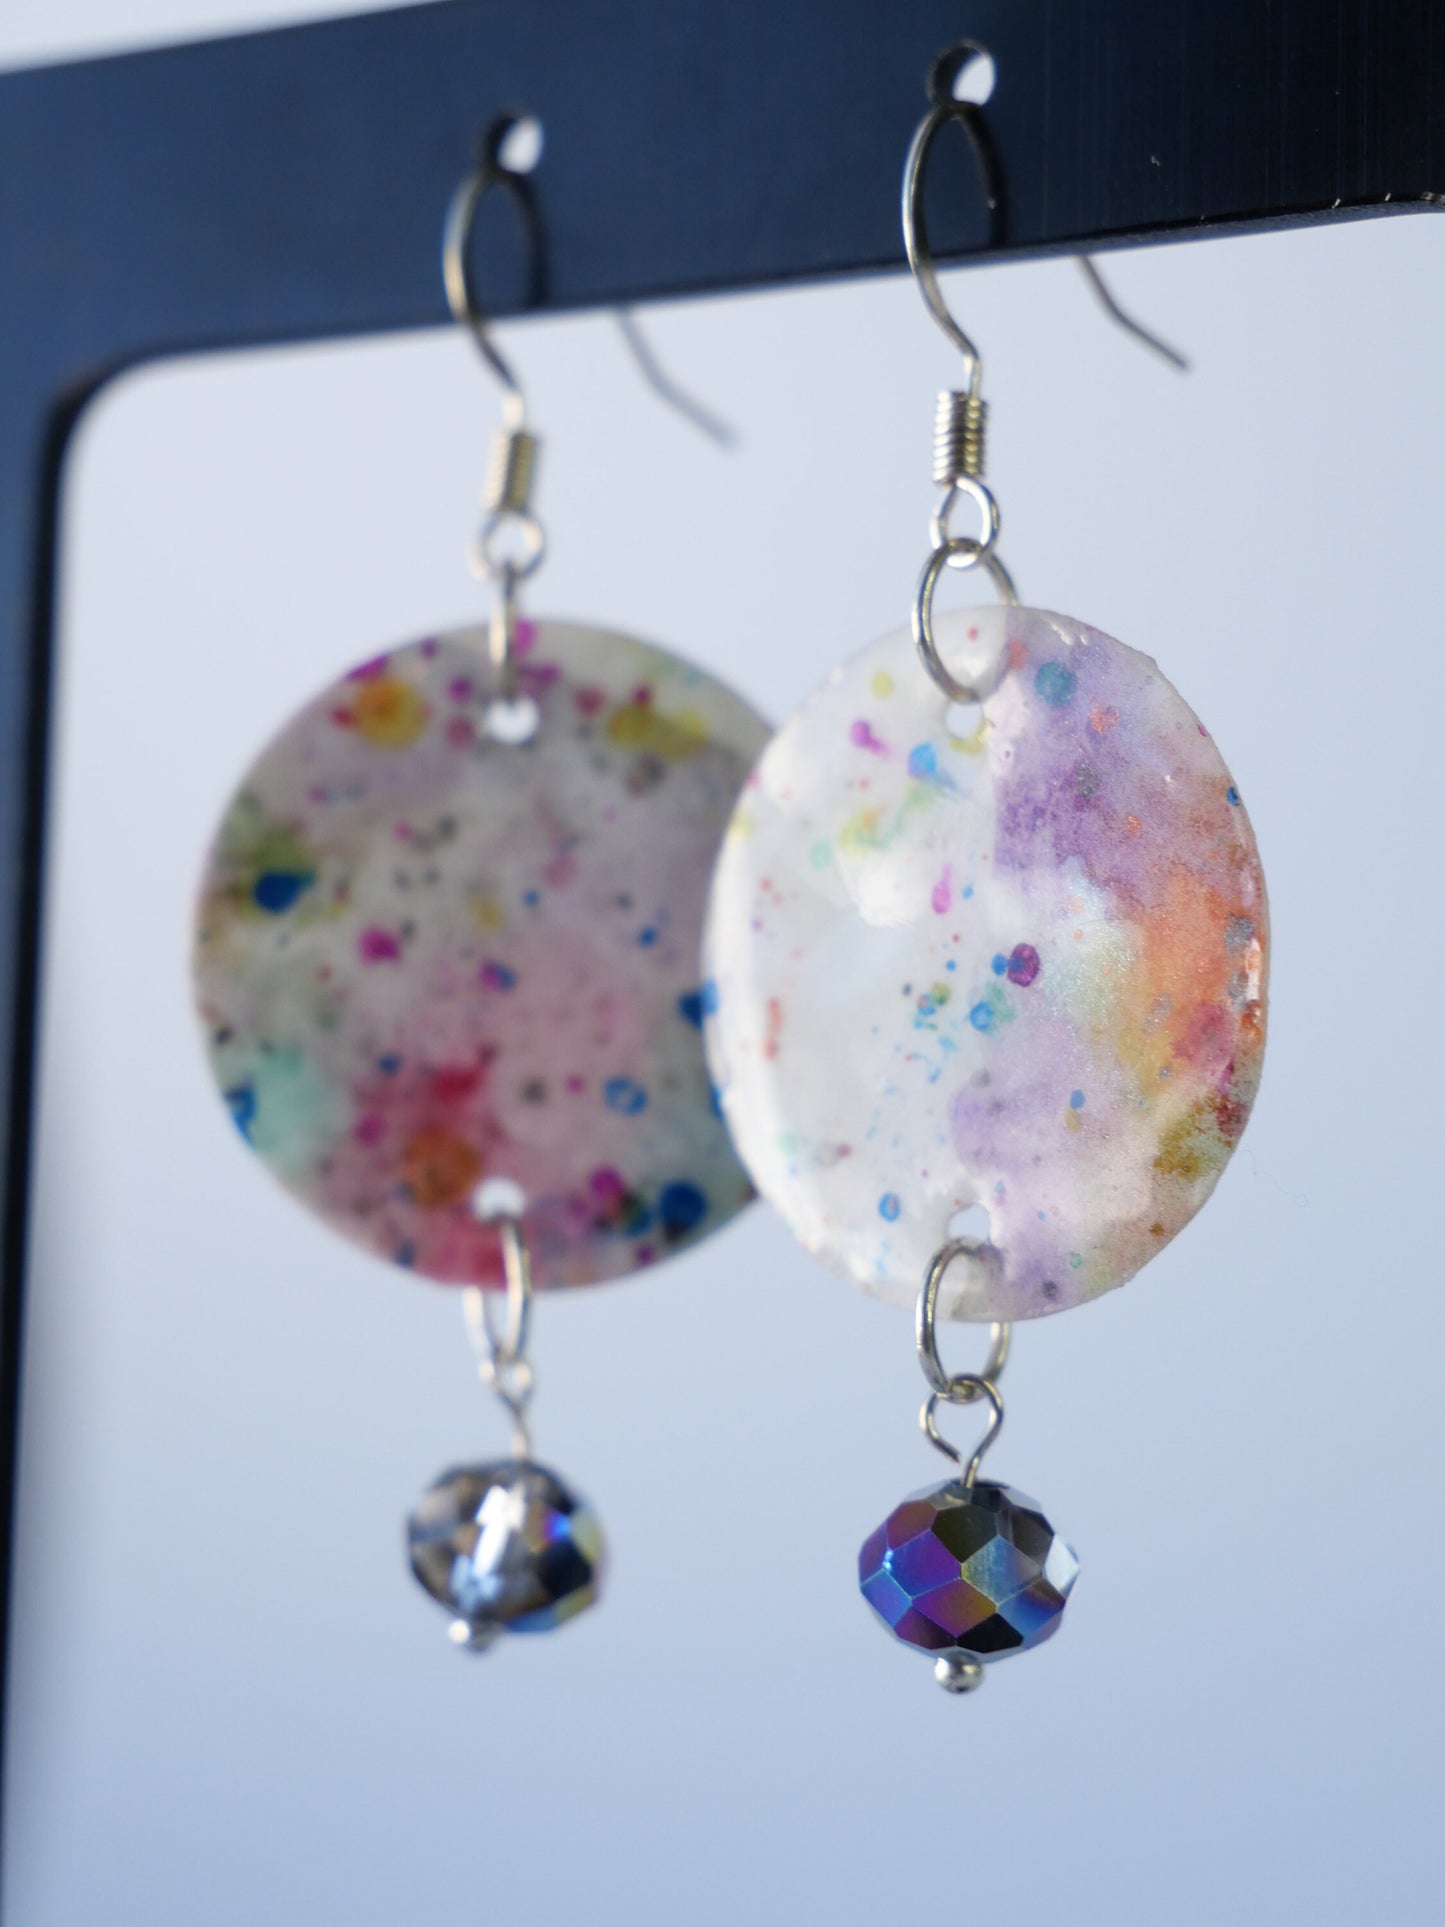 Confetti Crystal Earrings, Watercolor Earings, Made in Maine, Inspired by Maine.